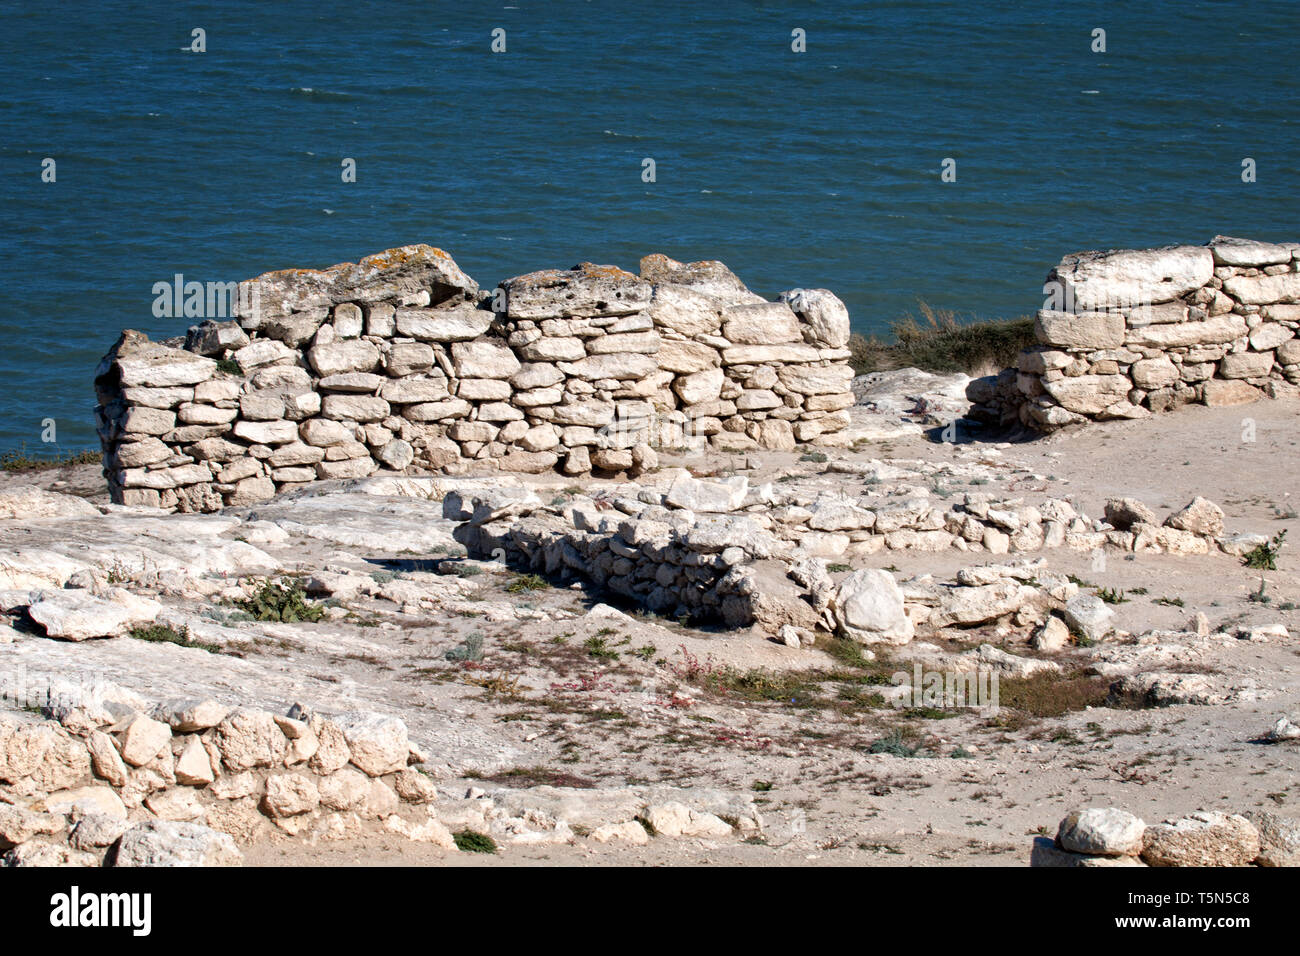 Ancient Greek Polis (Greek colonization) and Greek-Scythian settlements on the Black sea coast. Old archaeological excavations abandoned, shell rock f Stock Photo